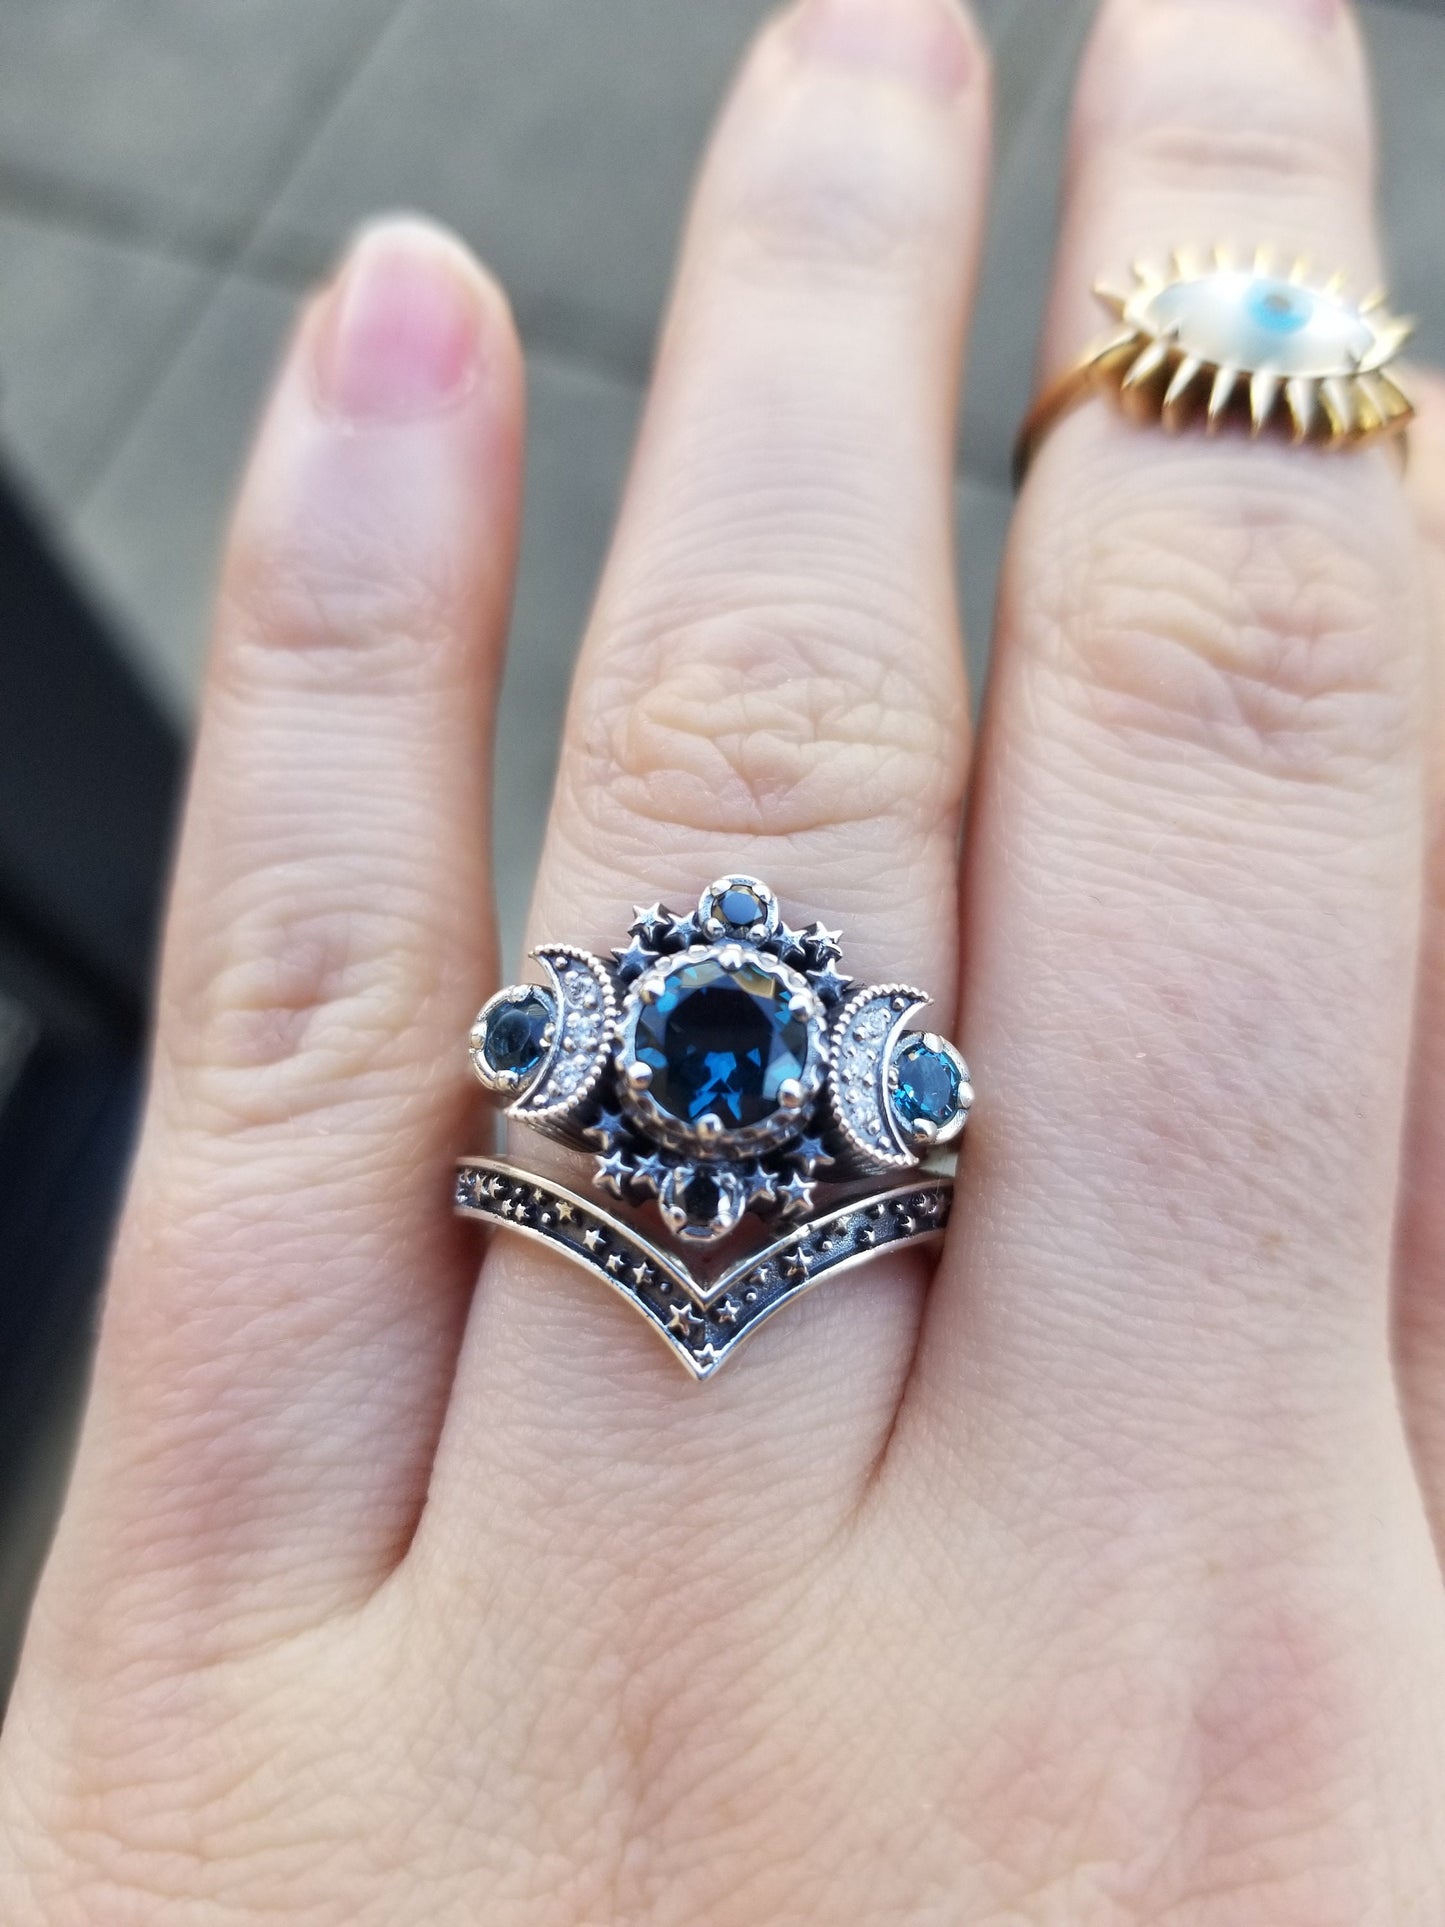 London Blue Topaz Cosmos Moon Engagement Ring Set Triple Moon Goddess Silver Ring with Stardust Chevron Wedding Band